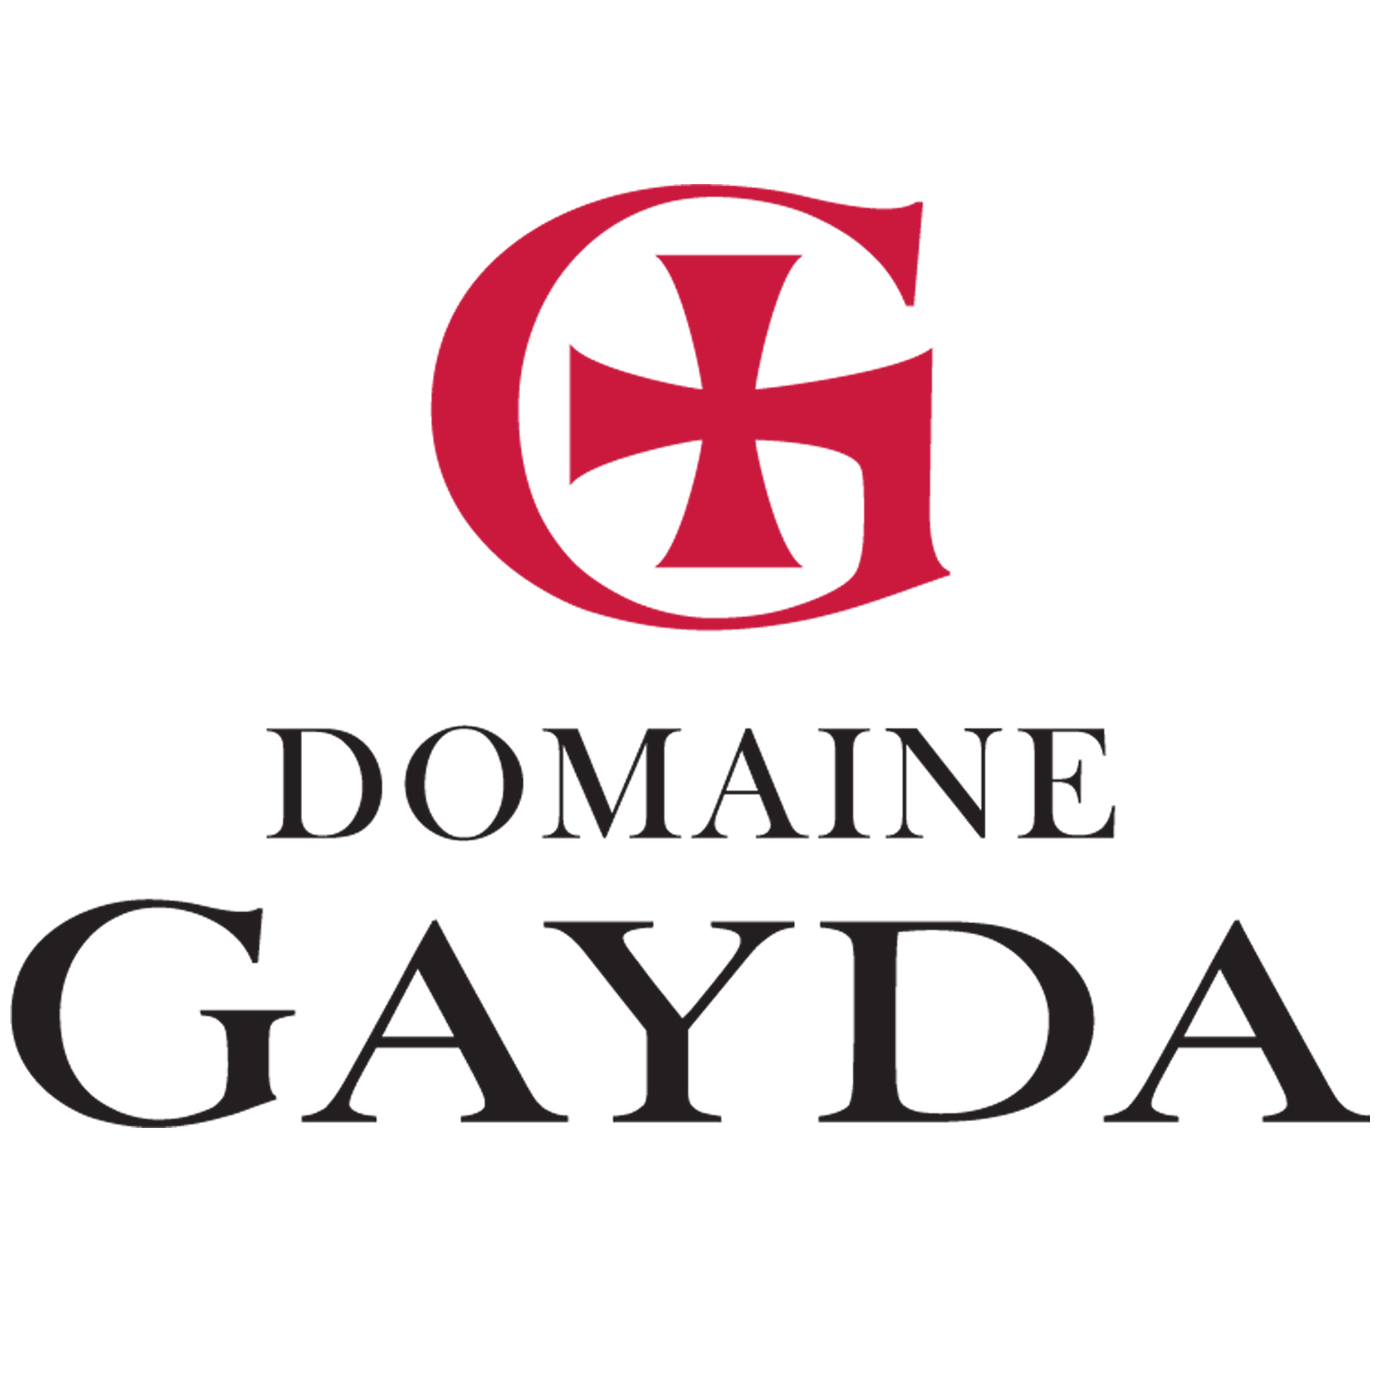 Welcome to the Domaine Gayda website - Gayda Vineyards